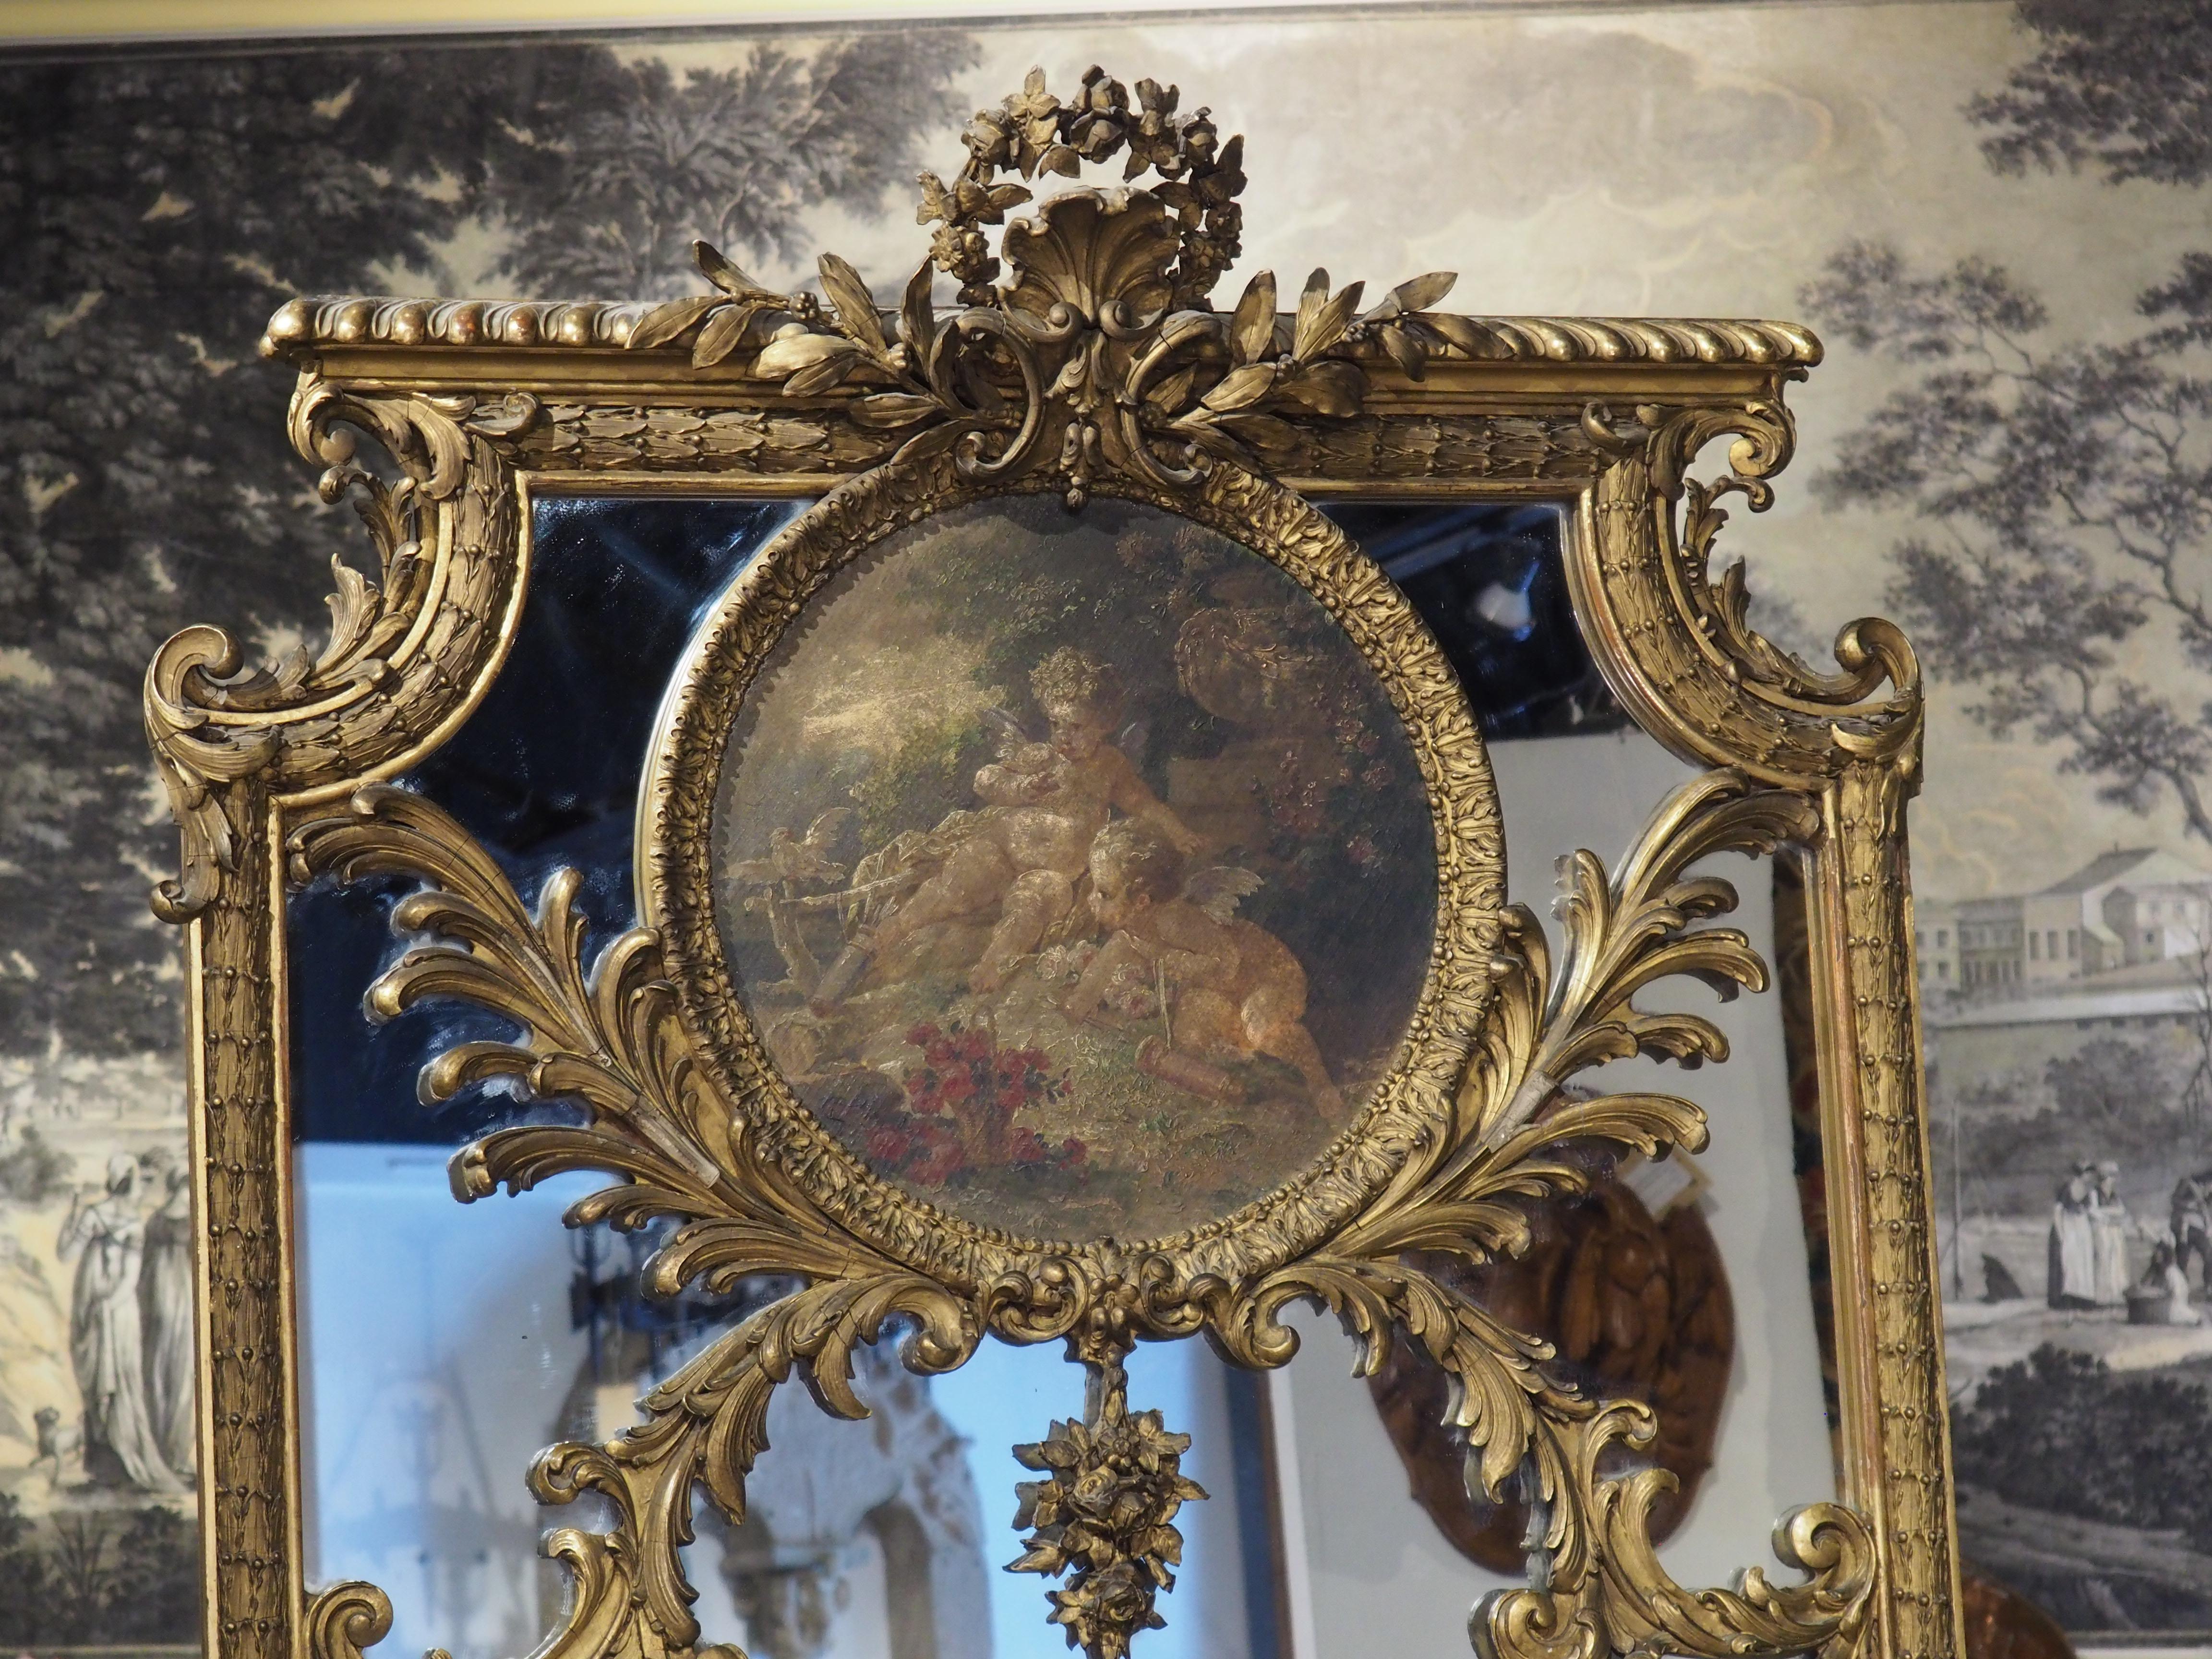 Produced in France, in the late 1800’s, this Louis XV style trumeau mirror features an oil on canvas painting. The 15 ½ inch diameter circular painting depicts two cupids sitting on the ground, watching a dove land on a perch. A basket of red roses